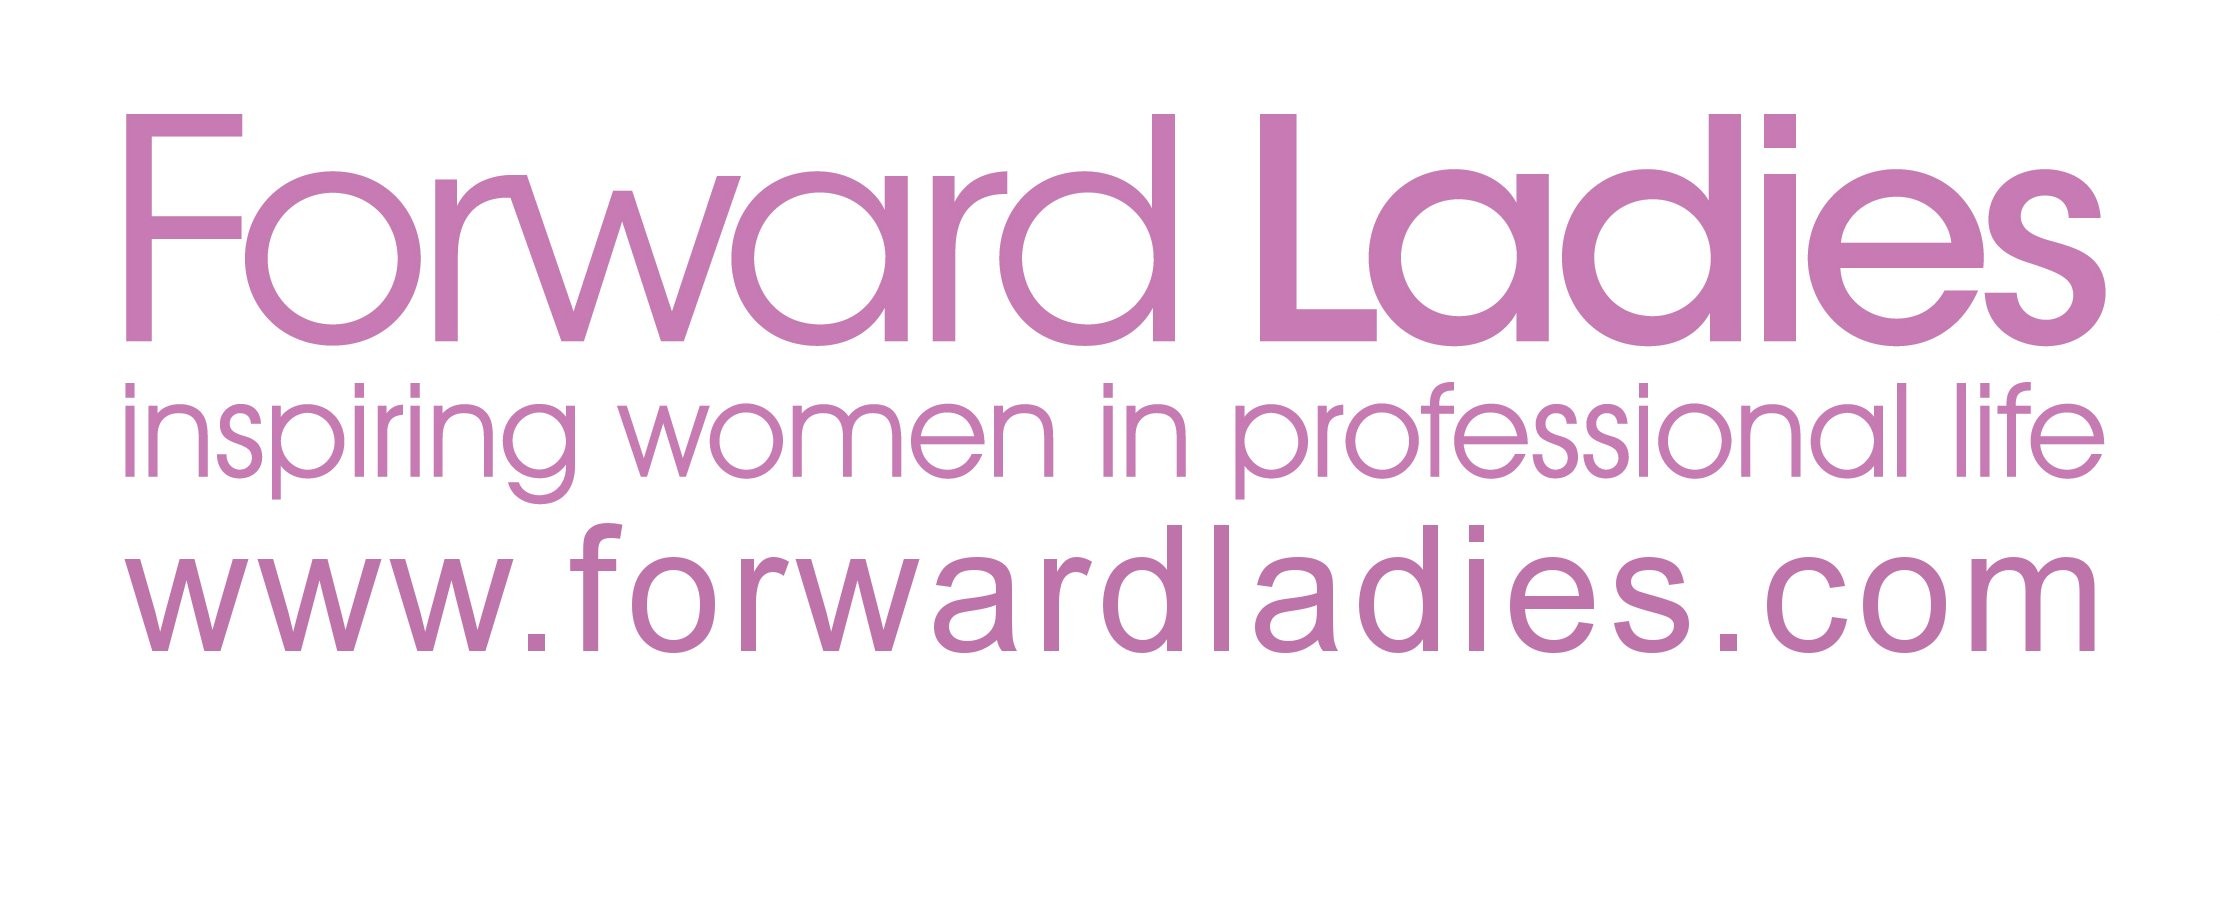 Forward Ladies Business Podcast